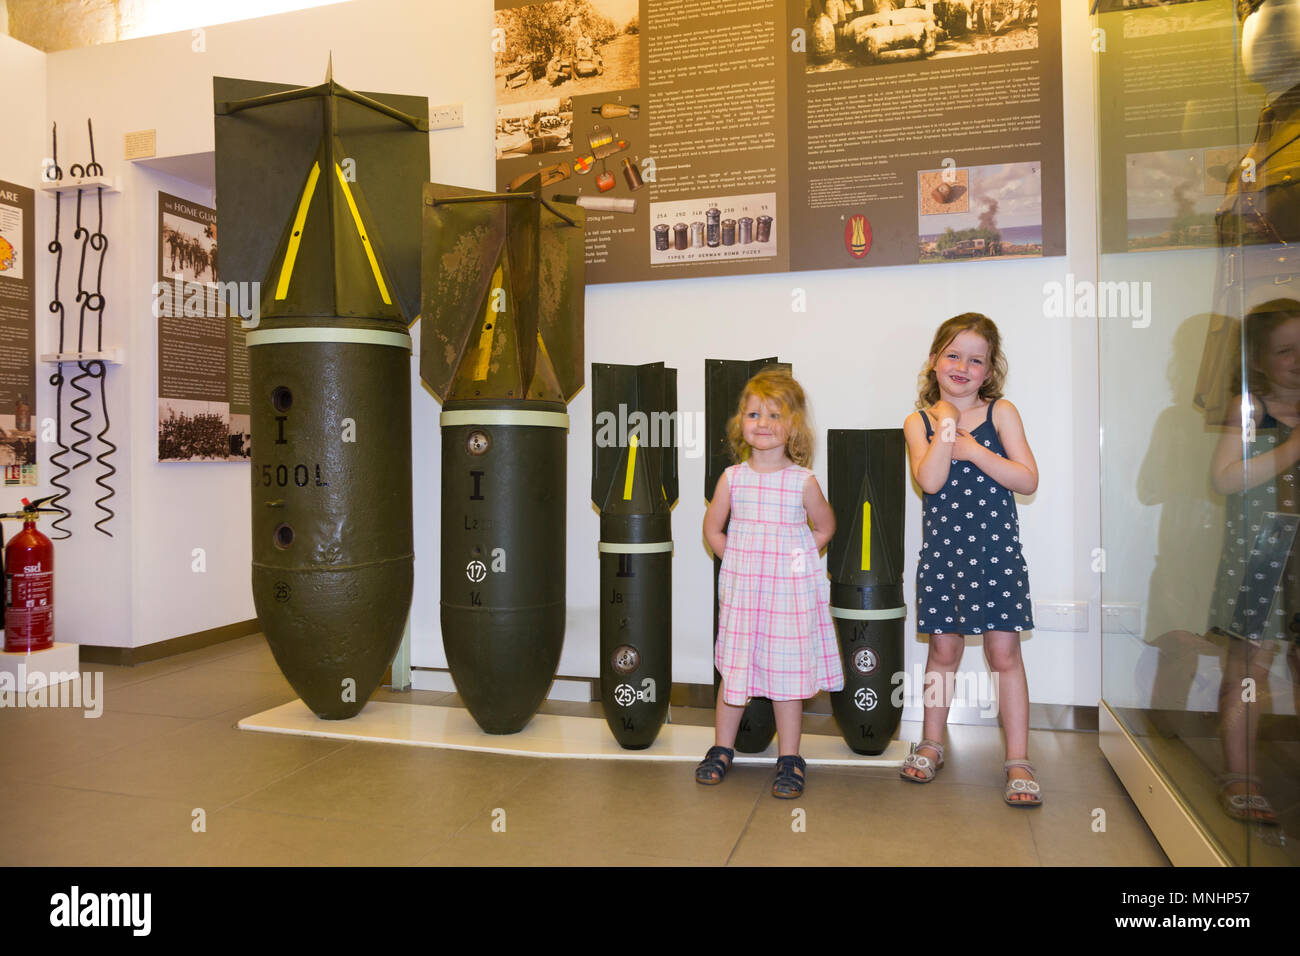 Display of bombs of various sizes used by axis countries Germany & Italy against Malta during World War II. Accompanied by young children child kid kids at the Malta at War Museum in Malta Stock Photo